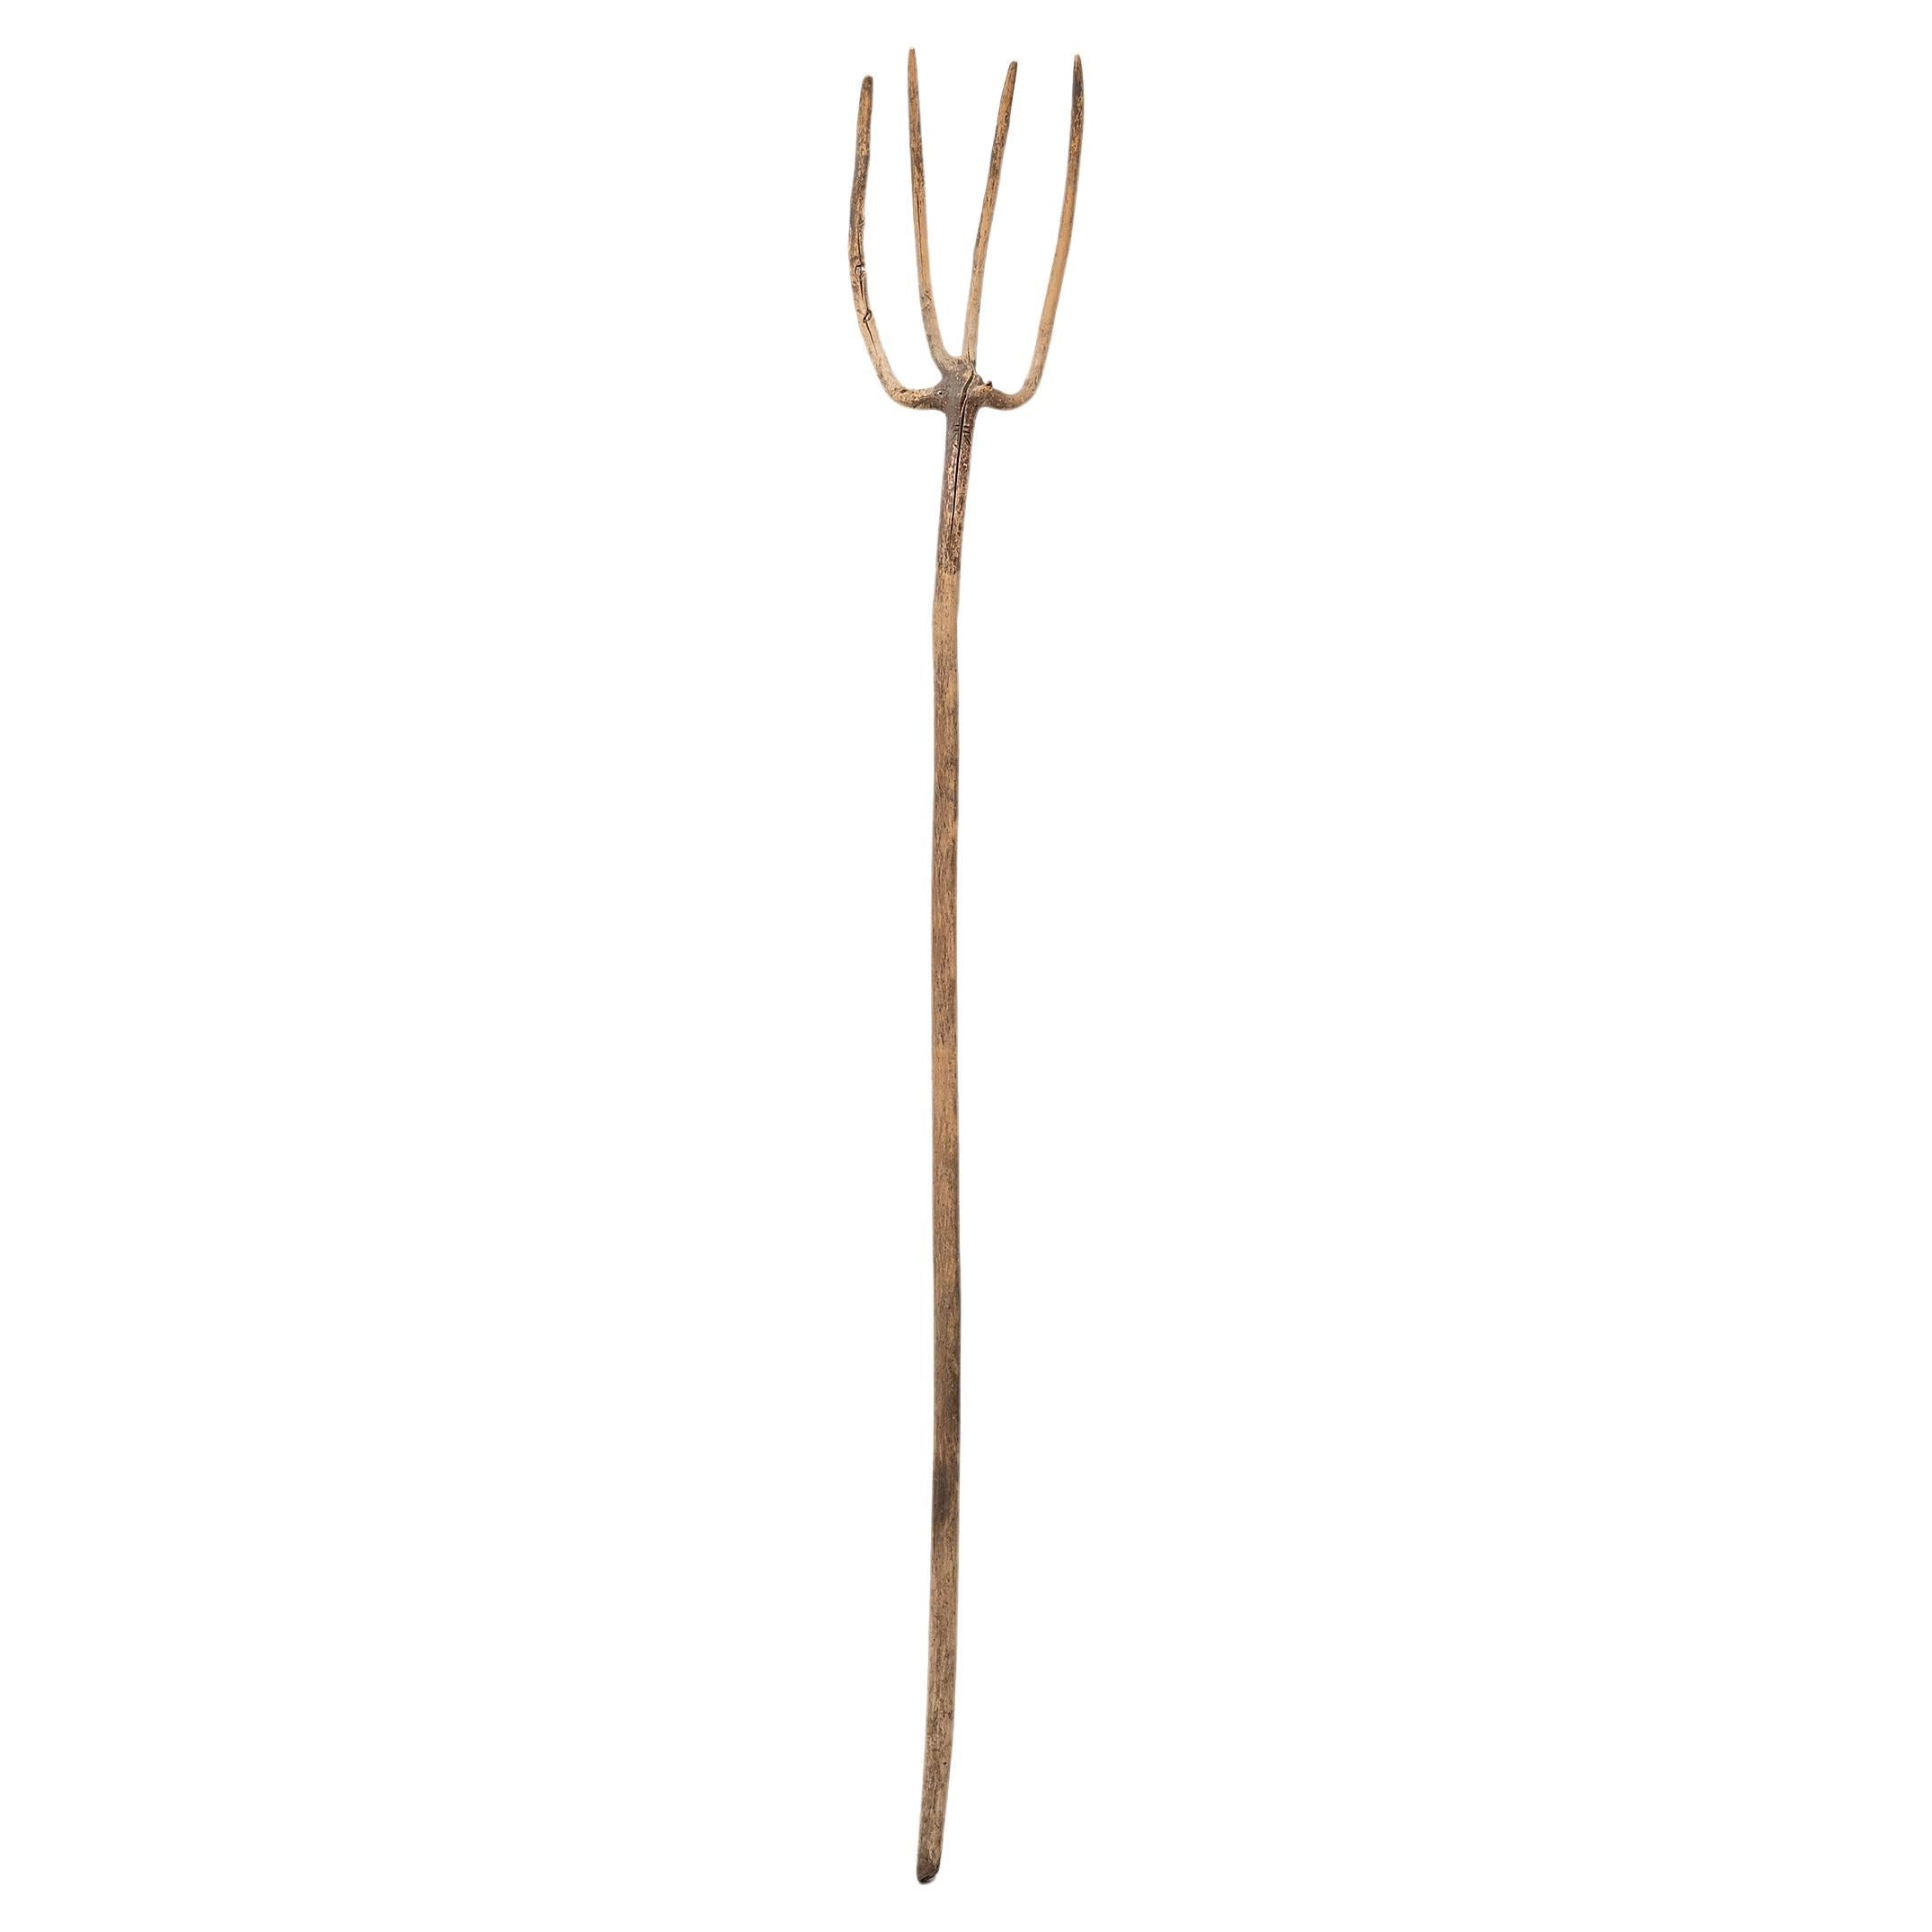 Chinese Provincial Bentwood Pitchfork, c. 1850